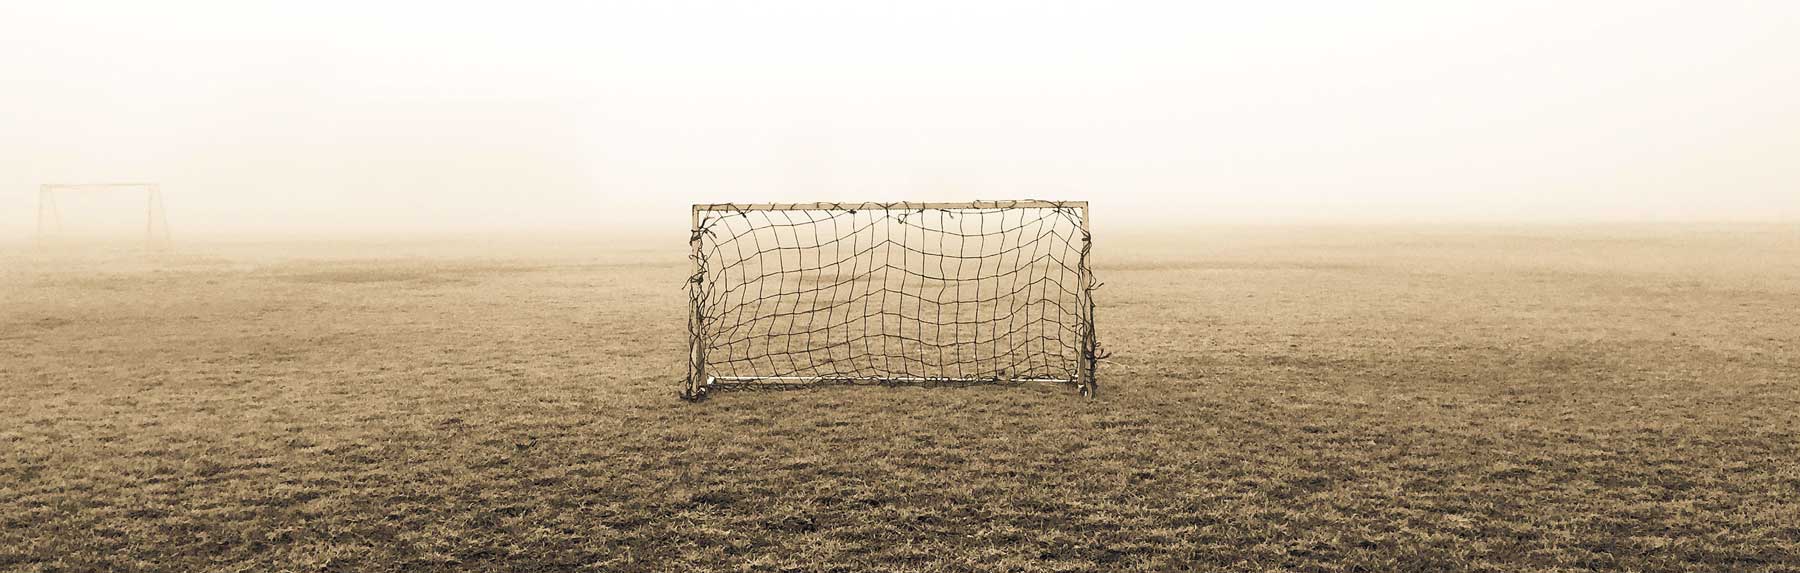 Image of an old and ragged soccer goal